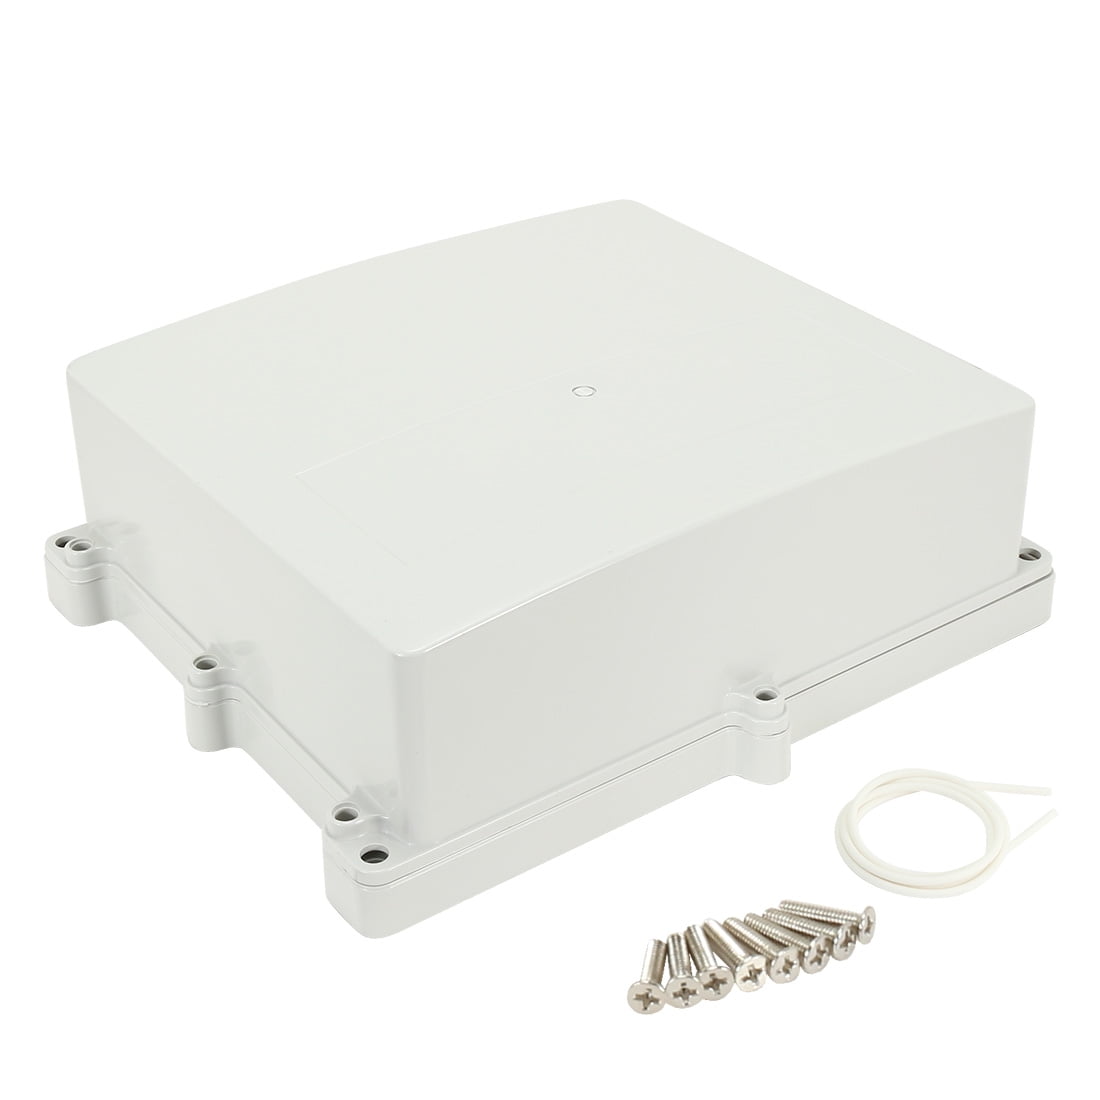 ABS Waterproof Junction Box Electrical Project Enclosure Round 2.6x1.4" 